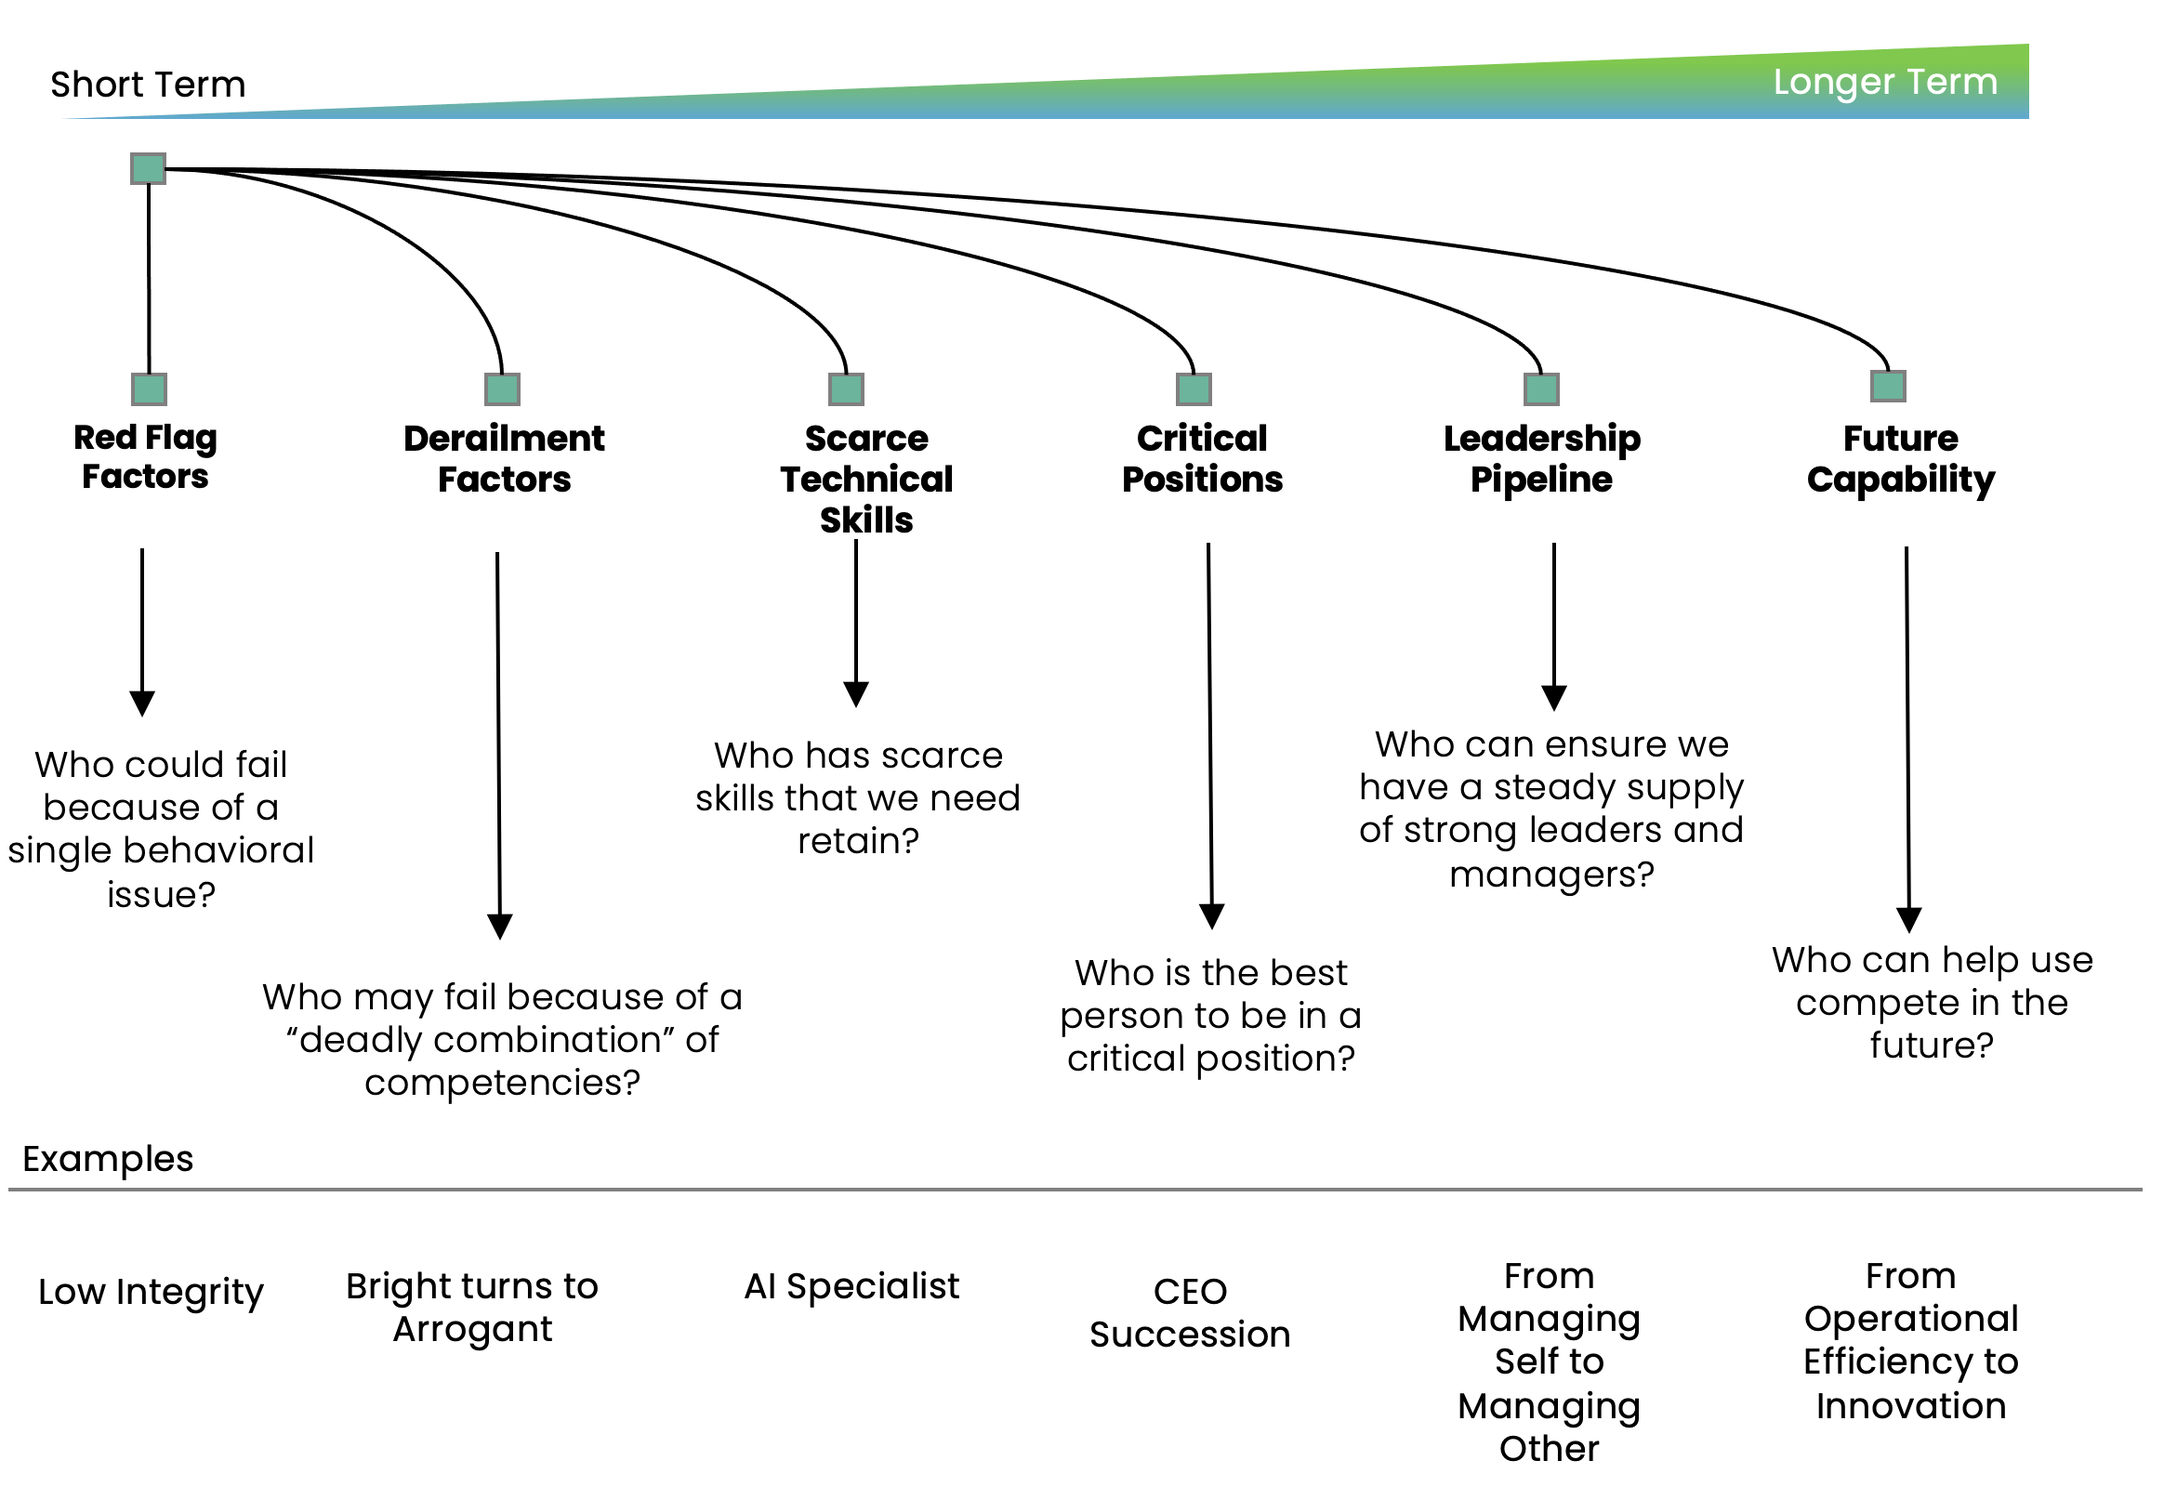 Image of a Talent Horizons Framework which considers short, medium and long term investment questions that need to be sneered to guide investment decisions about talent development.